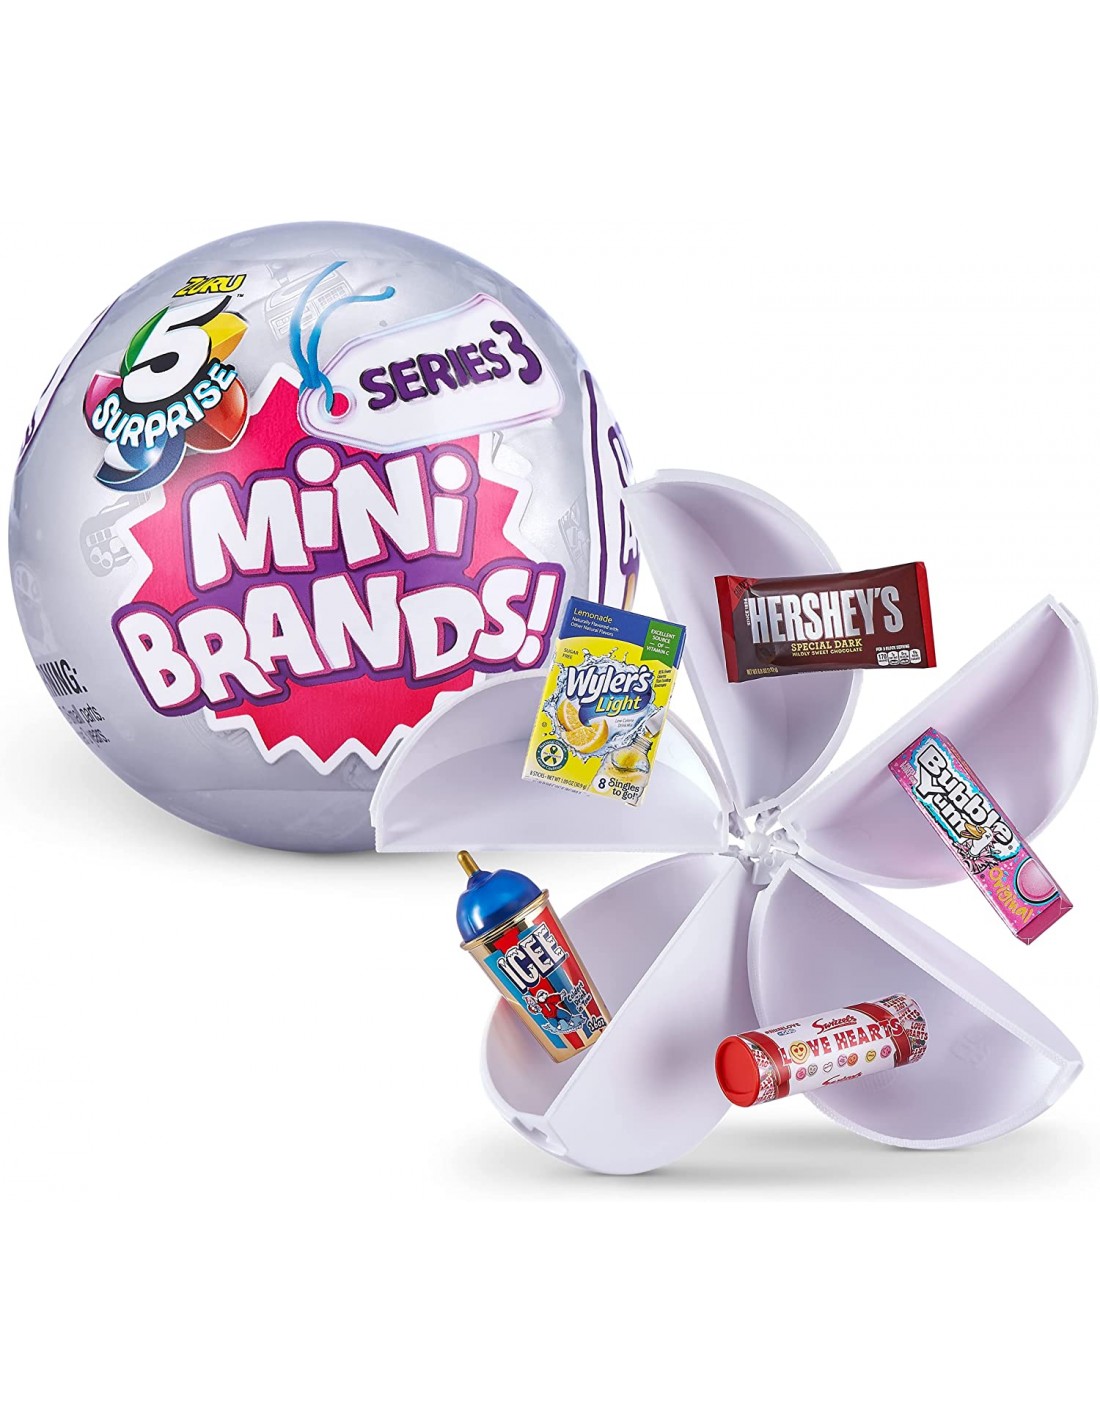 All-New 5 Surprise Foodie Mini Brands Serves Up Miniature Favorites from  Subway, Sonic, TGI Fridays, Carl's Jr, White Castle, and More - aNb Media,  Inc.